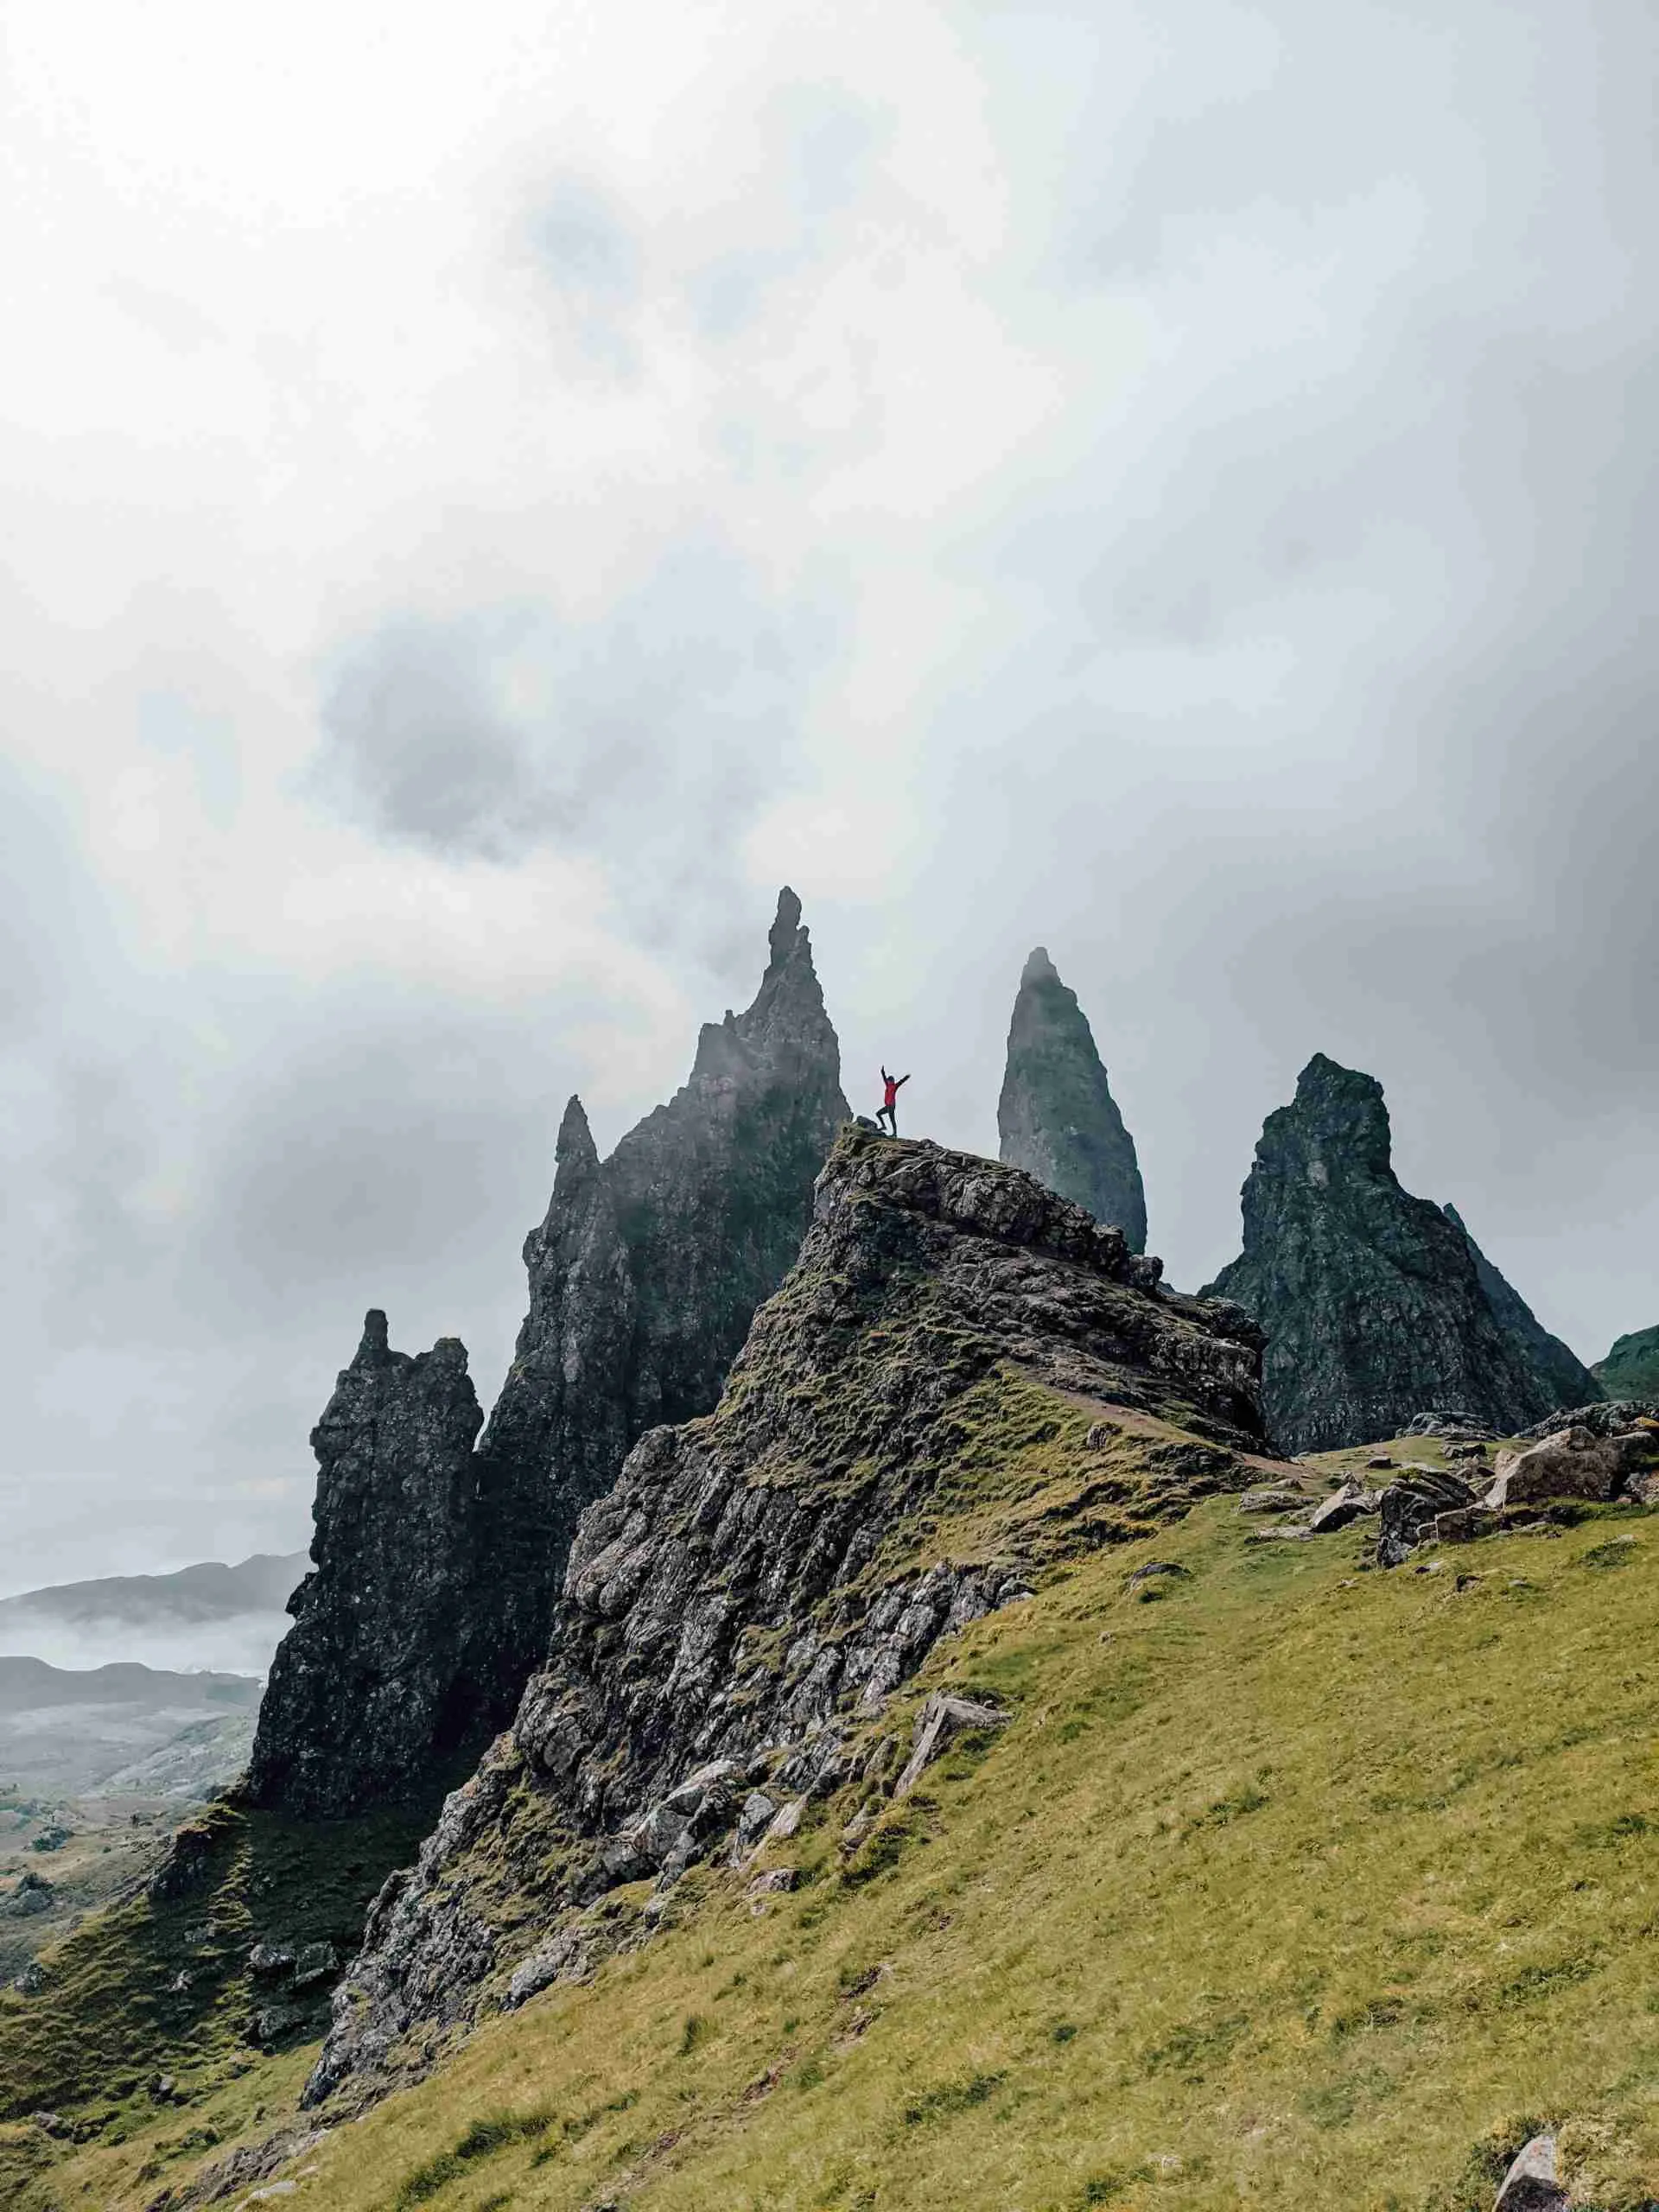 Someone standing on a rock on with the jagged peaks of the Old Man of Storr in the back ground